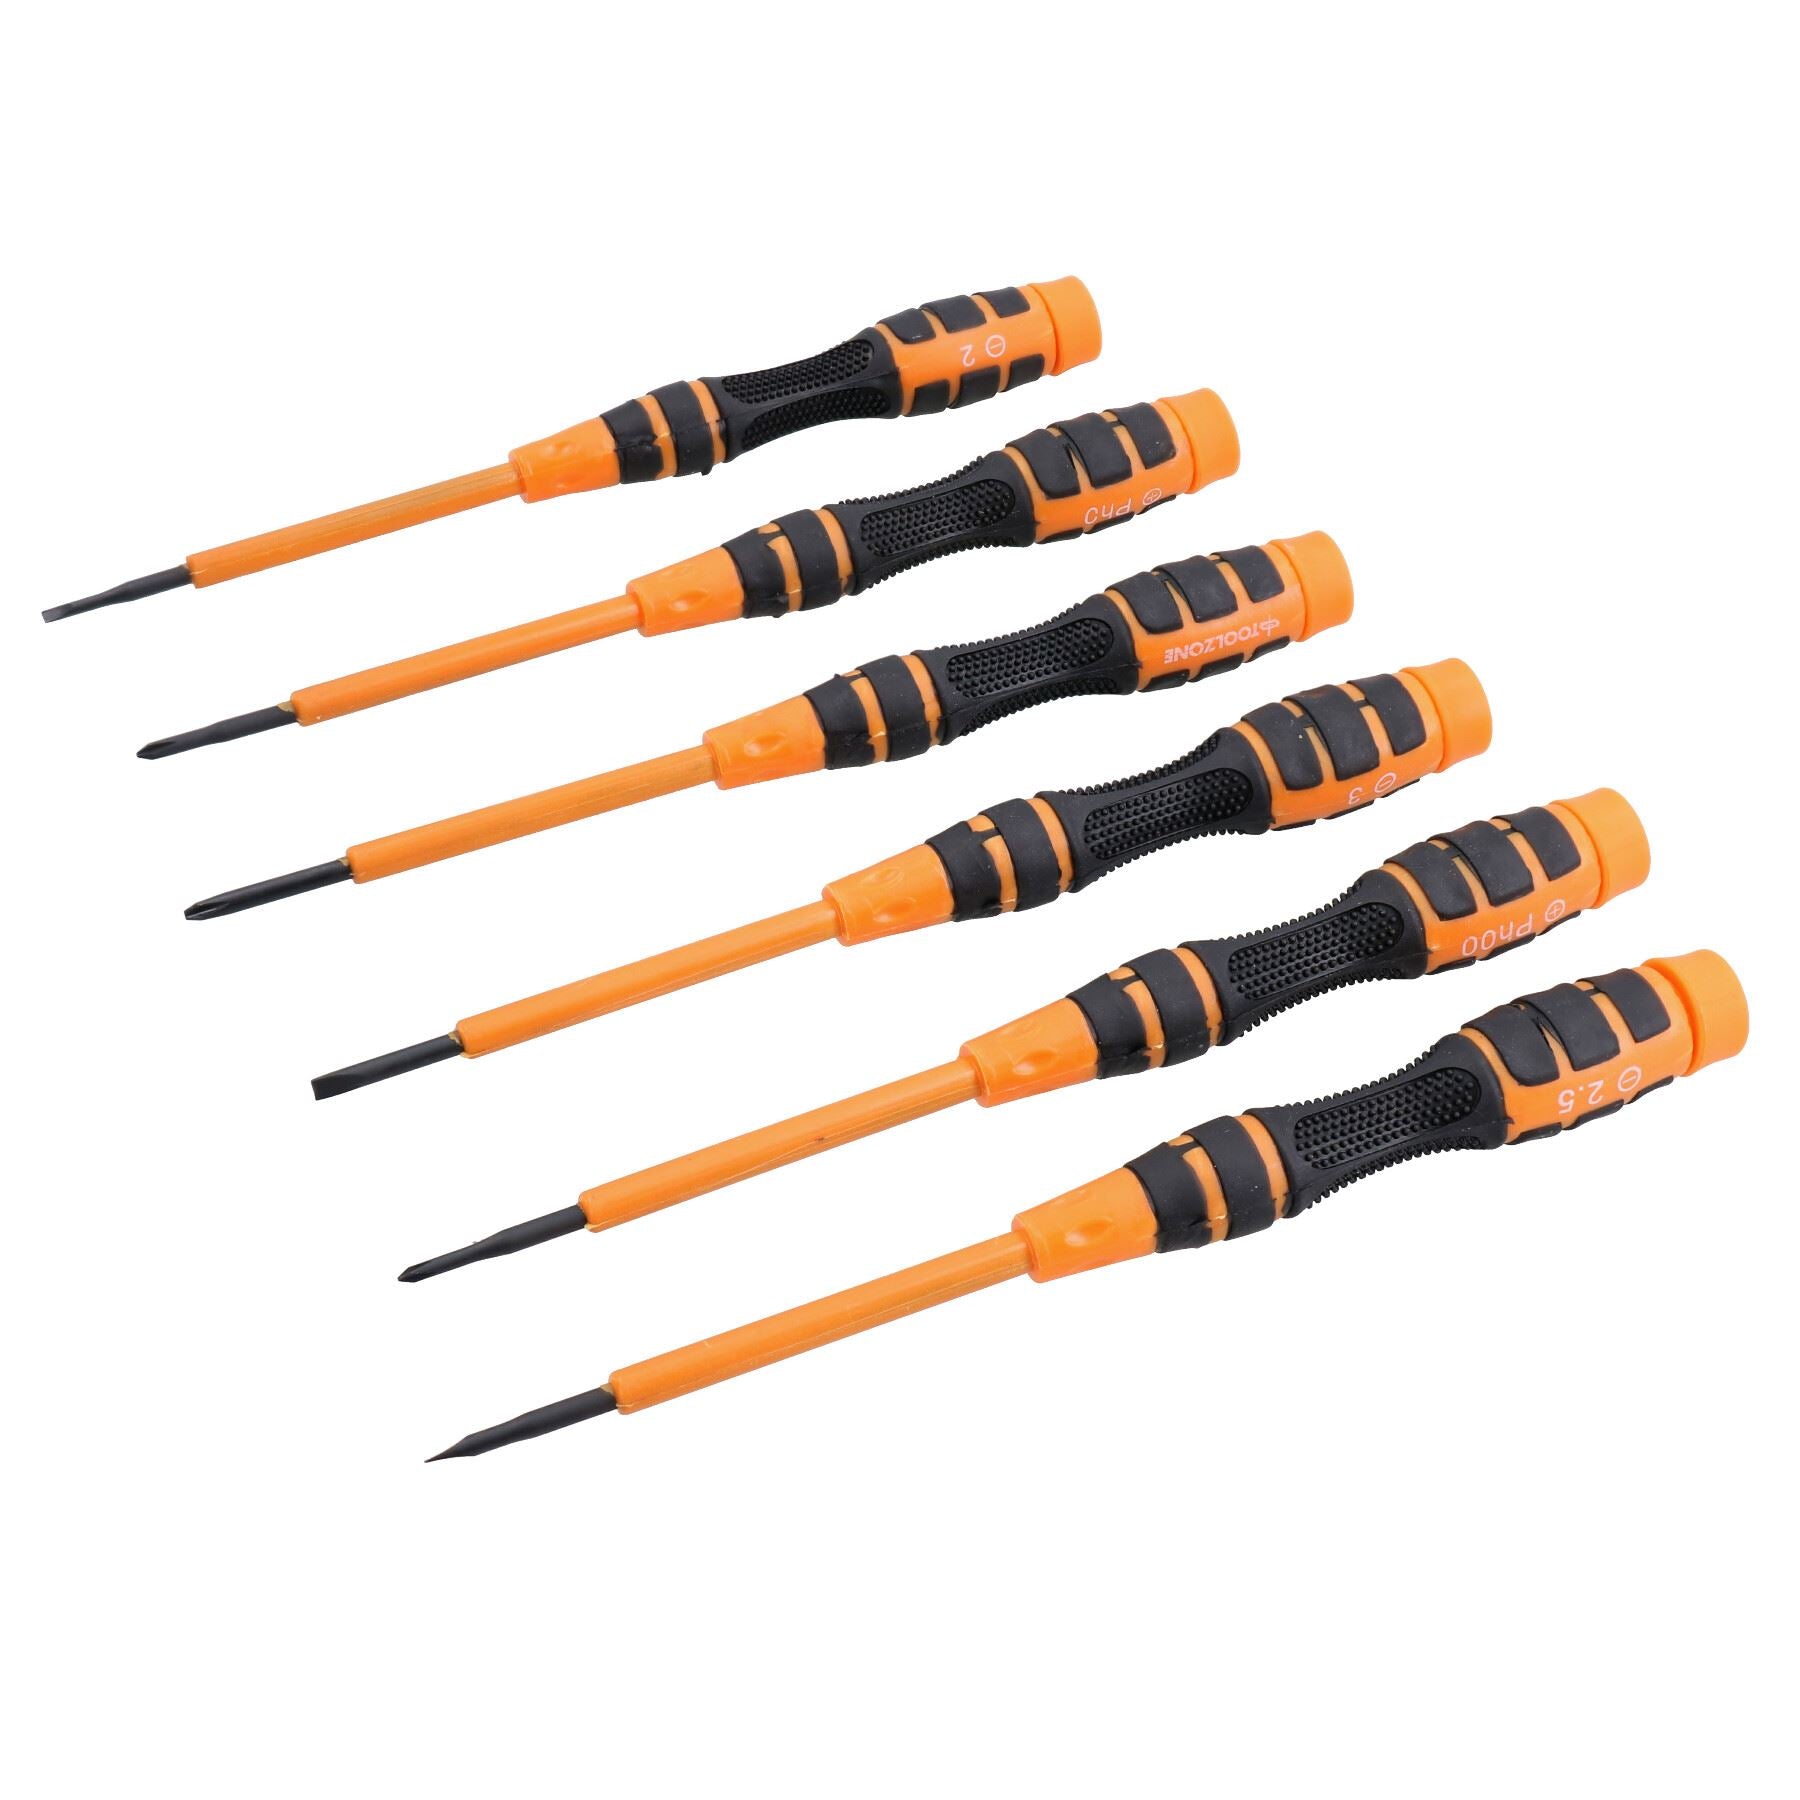 6pc Precision Screwdriver Set Slotted Phillips 2 - 3mm PH00 - PH1 Carbon Steel